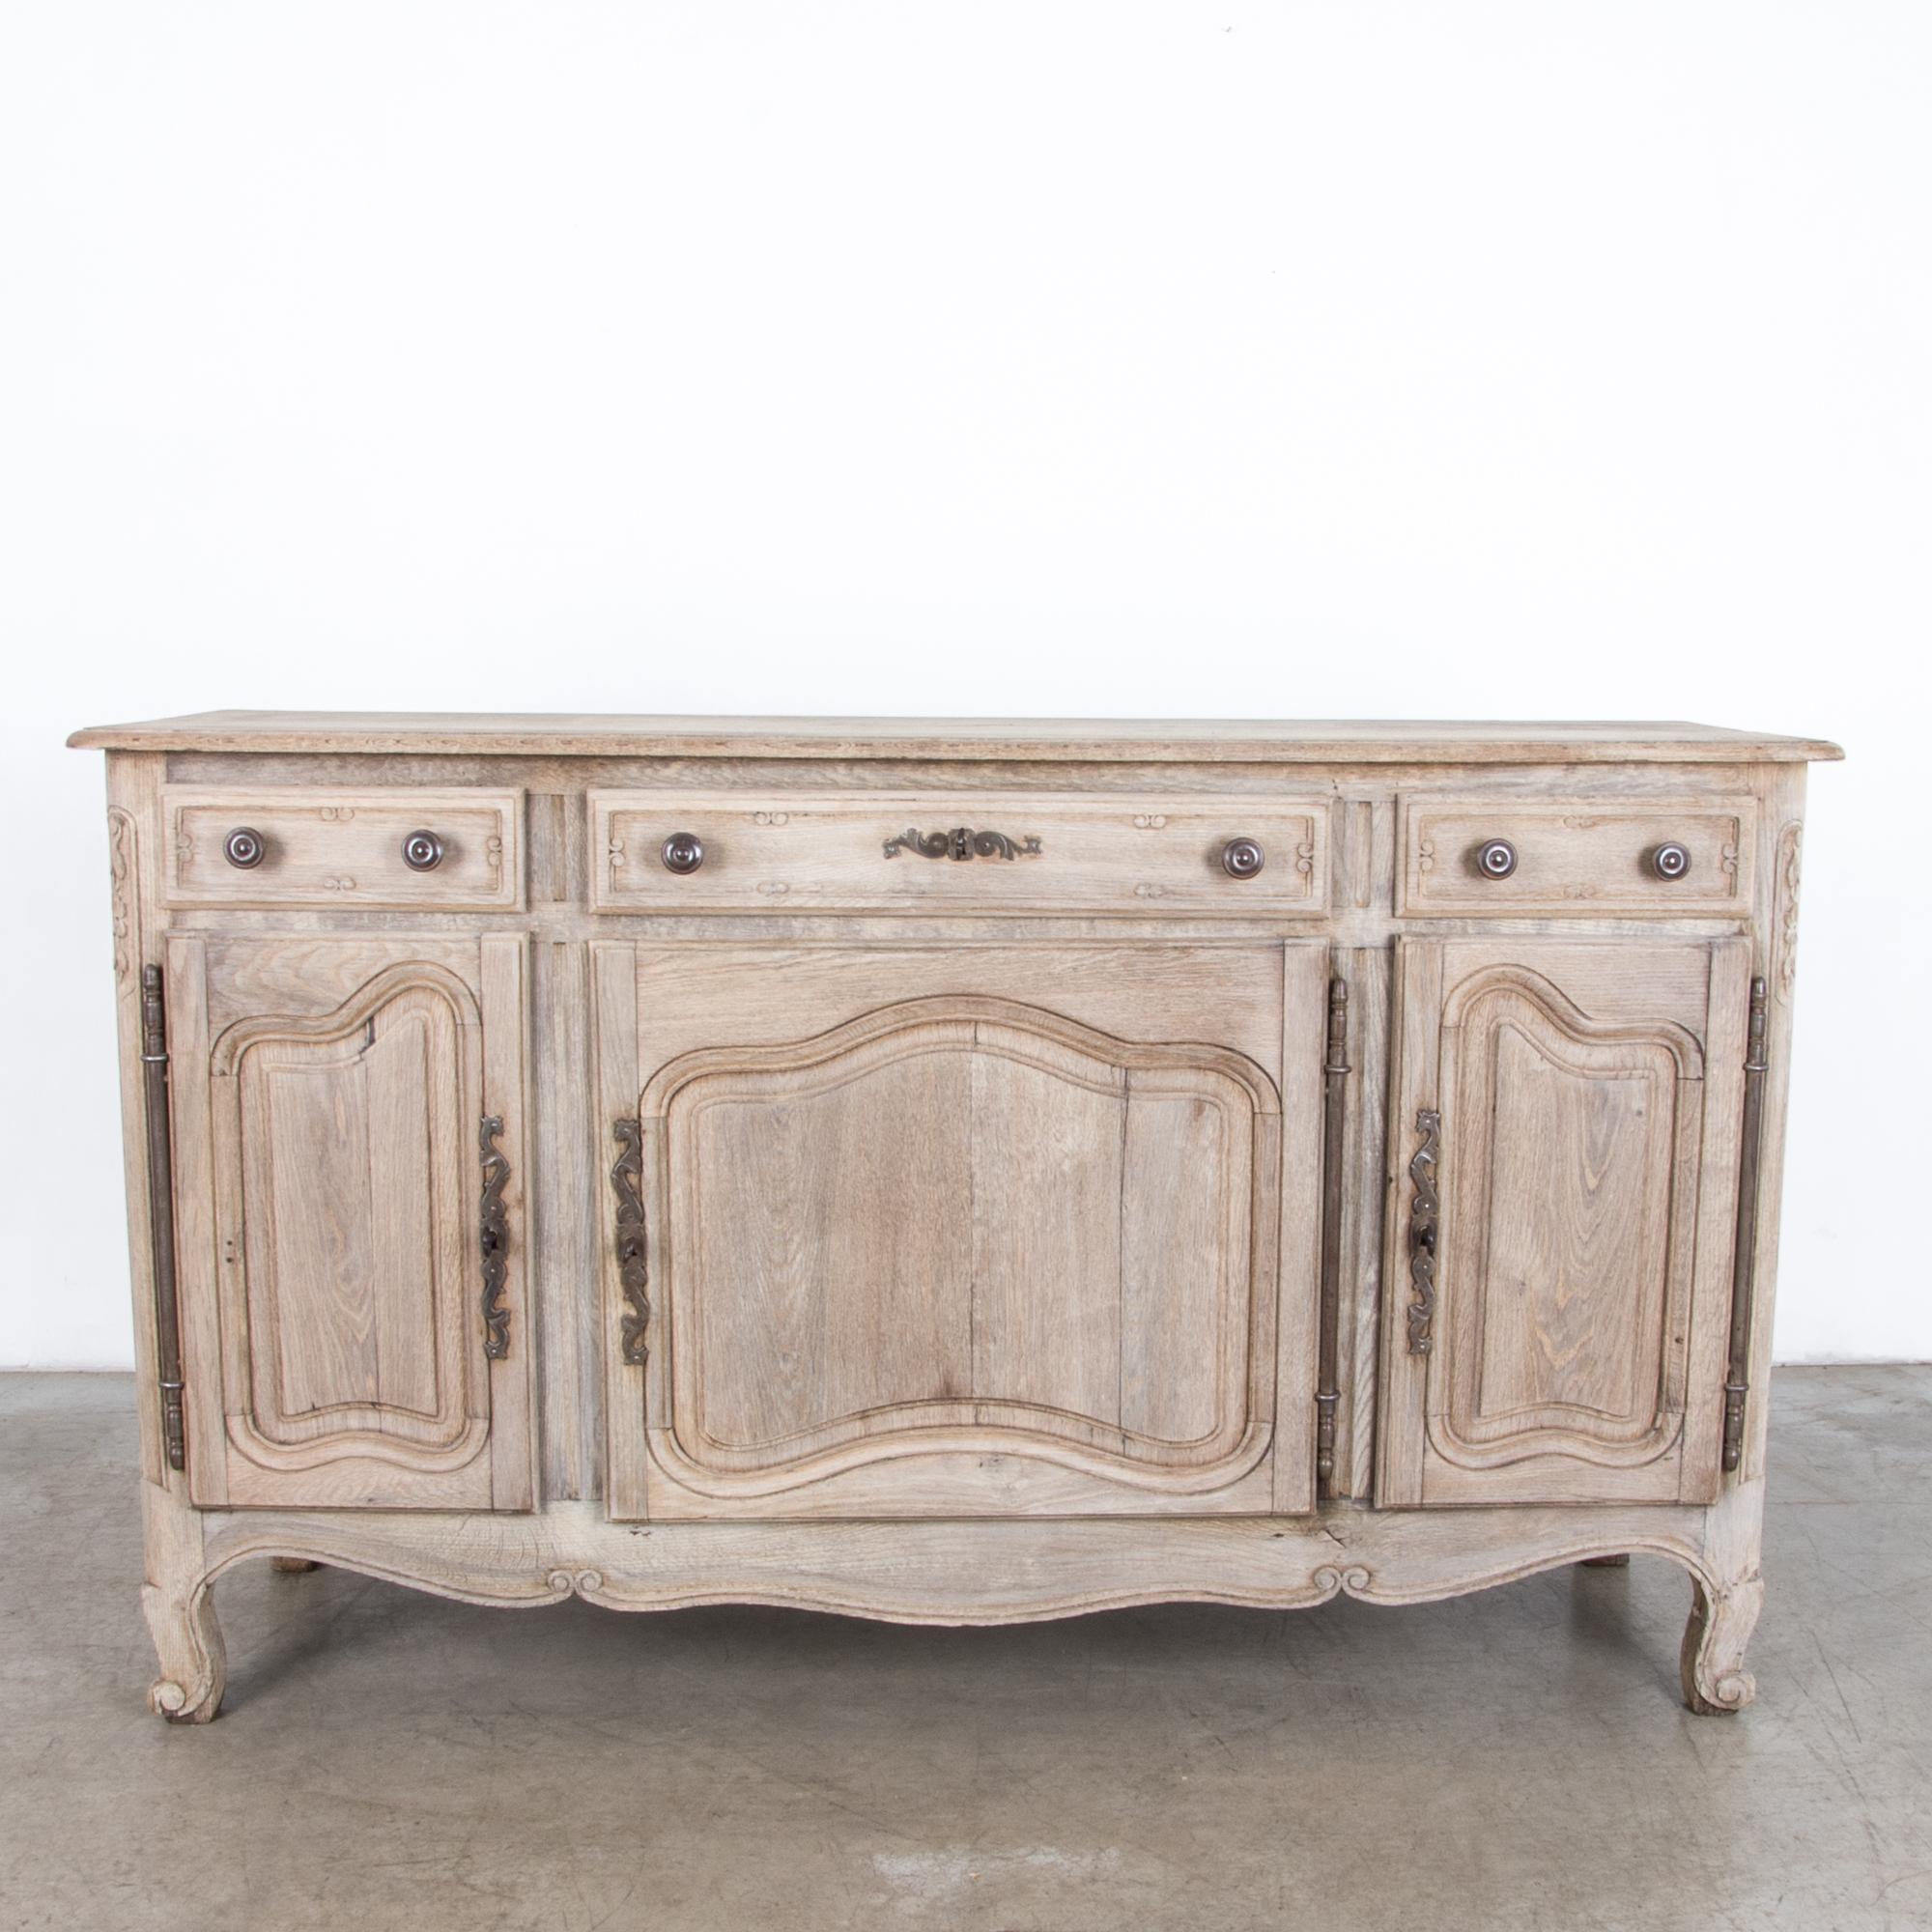 A three-drawer buffet cabinet in bleached oak. From France, circa 1900, this well proportioned provincial oak piece is accentuated by distinctive iron hardware. Decorative floral carvings give a sense of place, the beauty of nature. Attention to